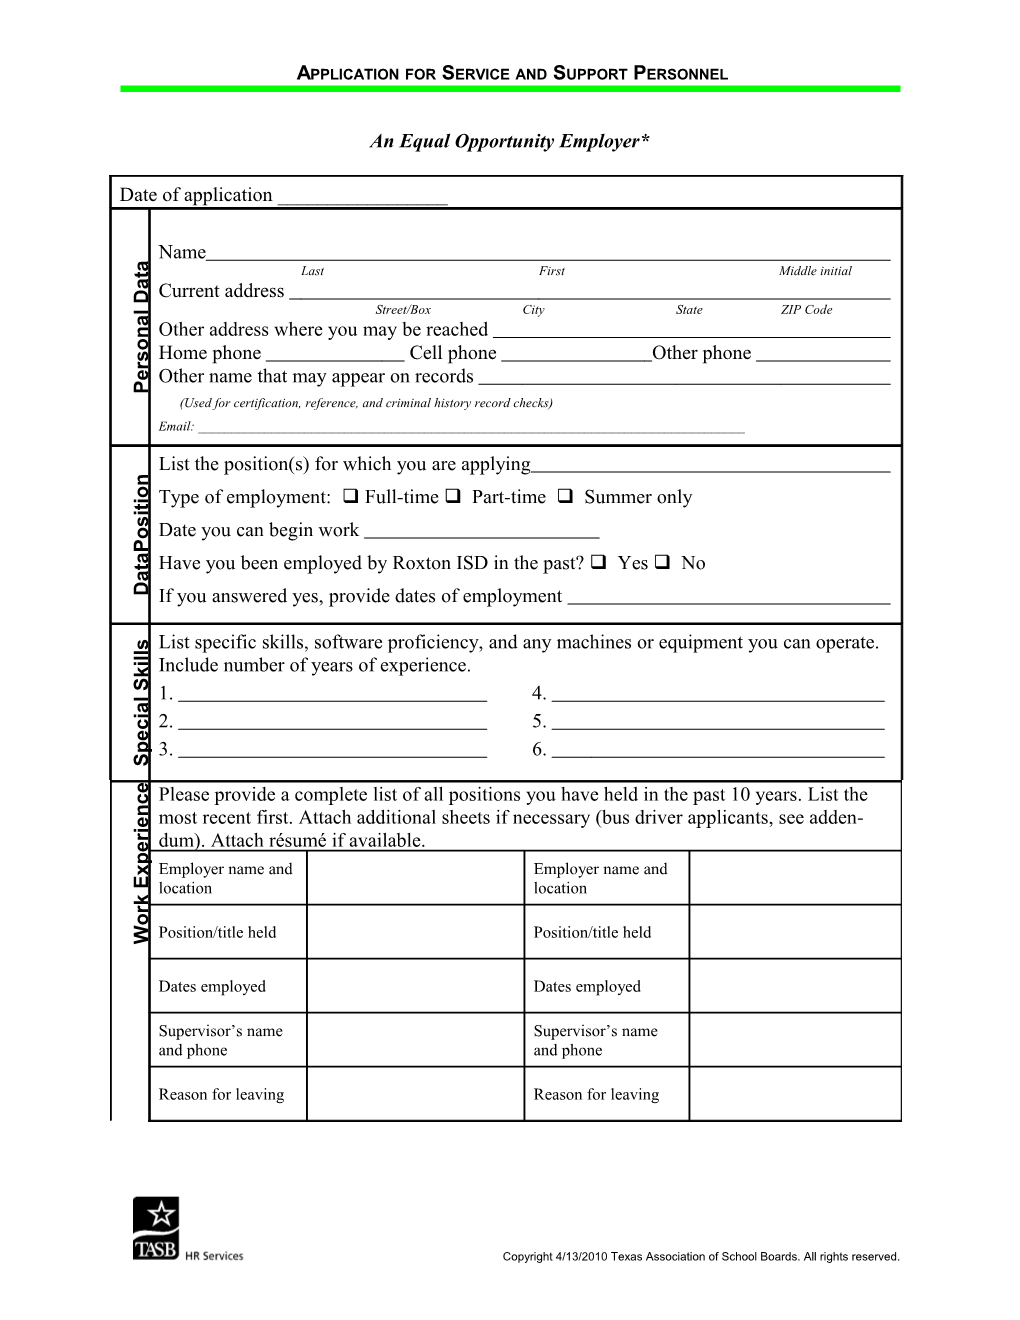 Employment Application for Service and Support Personnel s1